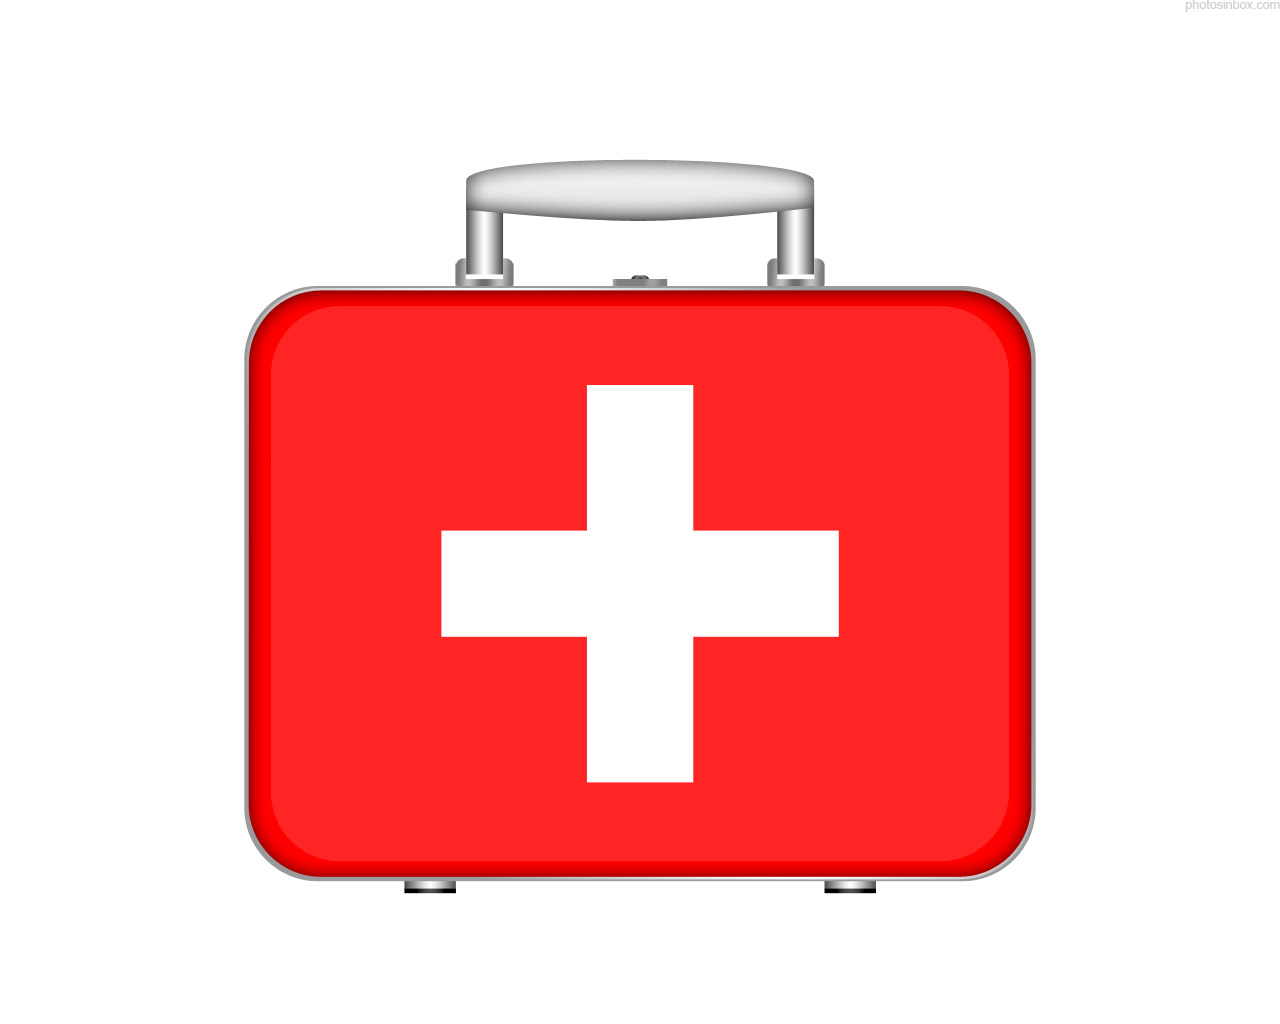 First Aid Kit Cartoon Pictures ~ Aid Cartoon Kit First Kits Icon ...